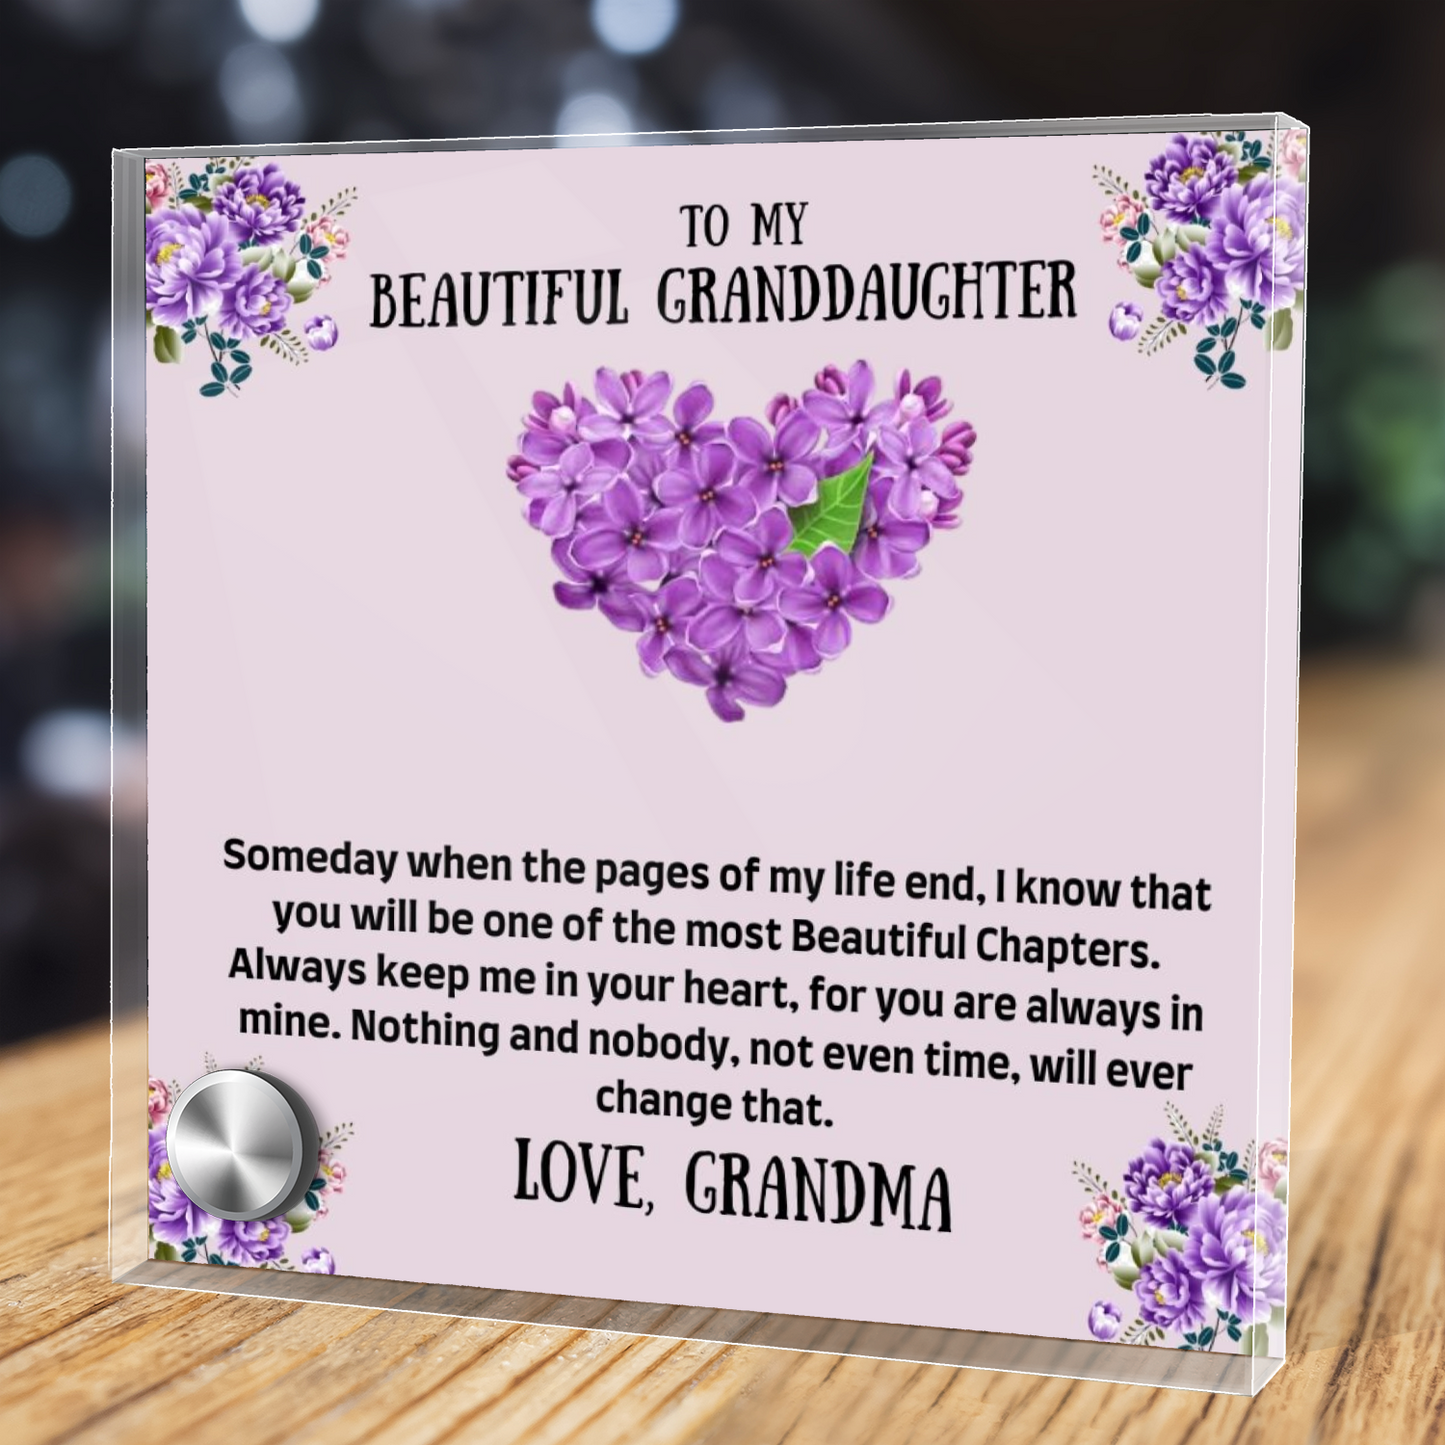 To My Granddaughter - Lumen Glass Message Display Stand with Necklace, Gifts for Granddaughters, Granddaughter Necklace, For Granddaughters